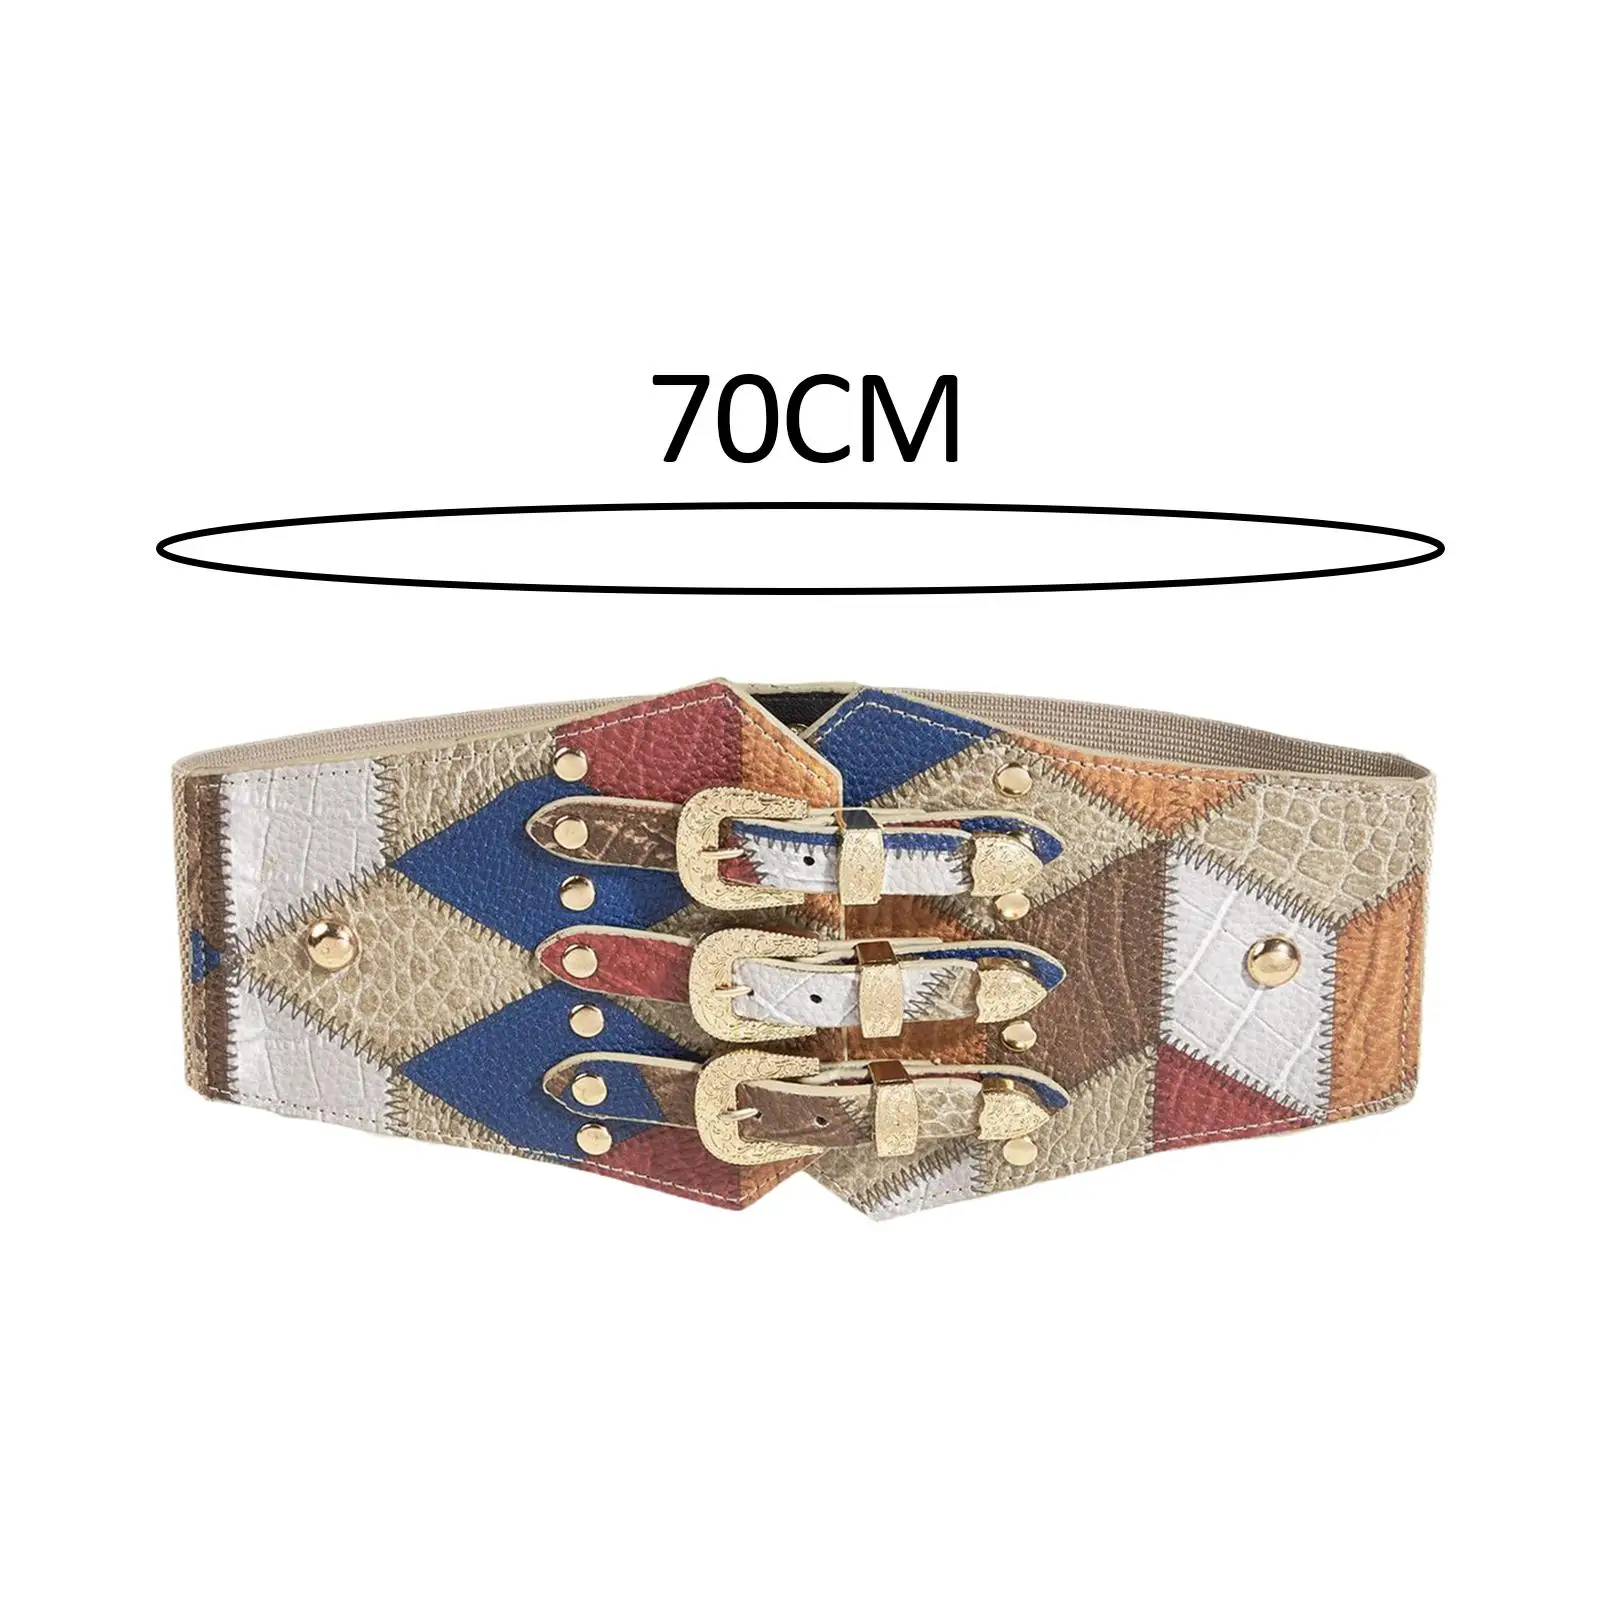 Waistband Strap with Pin Buckle 27.5inch Women Wide Waist Belts PU Leather Stretchy Corset Cinch Belt for Clothes Skirts Dating